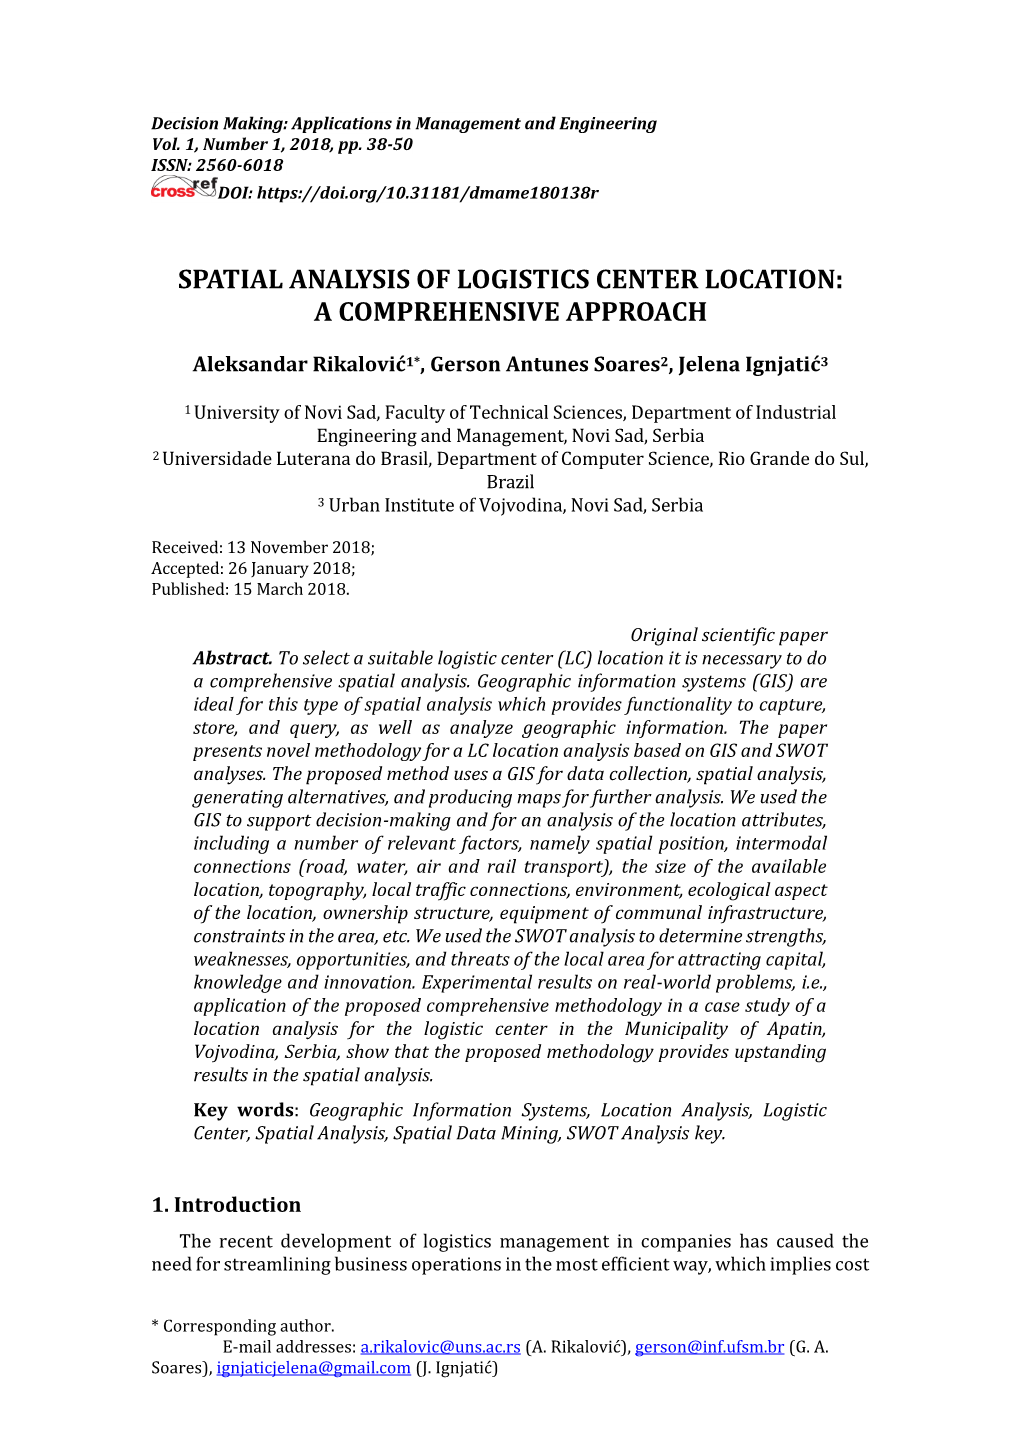 Spatial Analysis of Logistics Center Location: a Comprehensive Approach